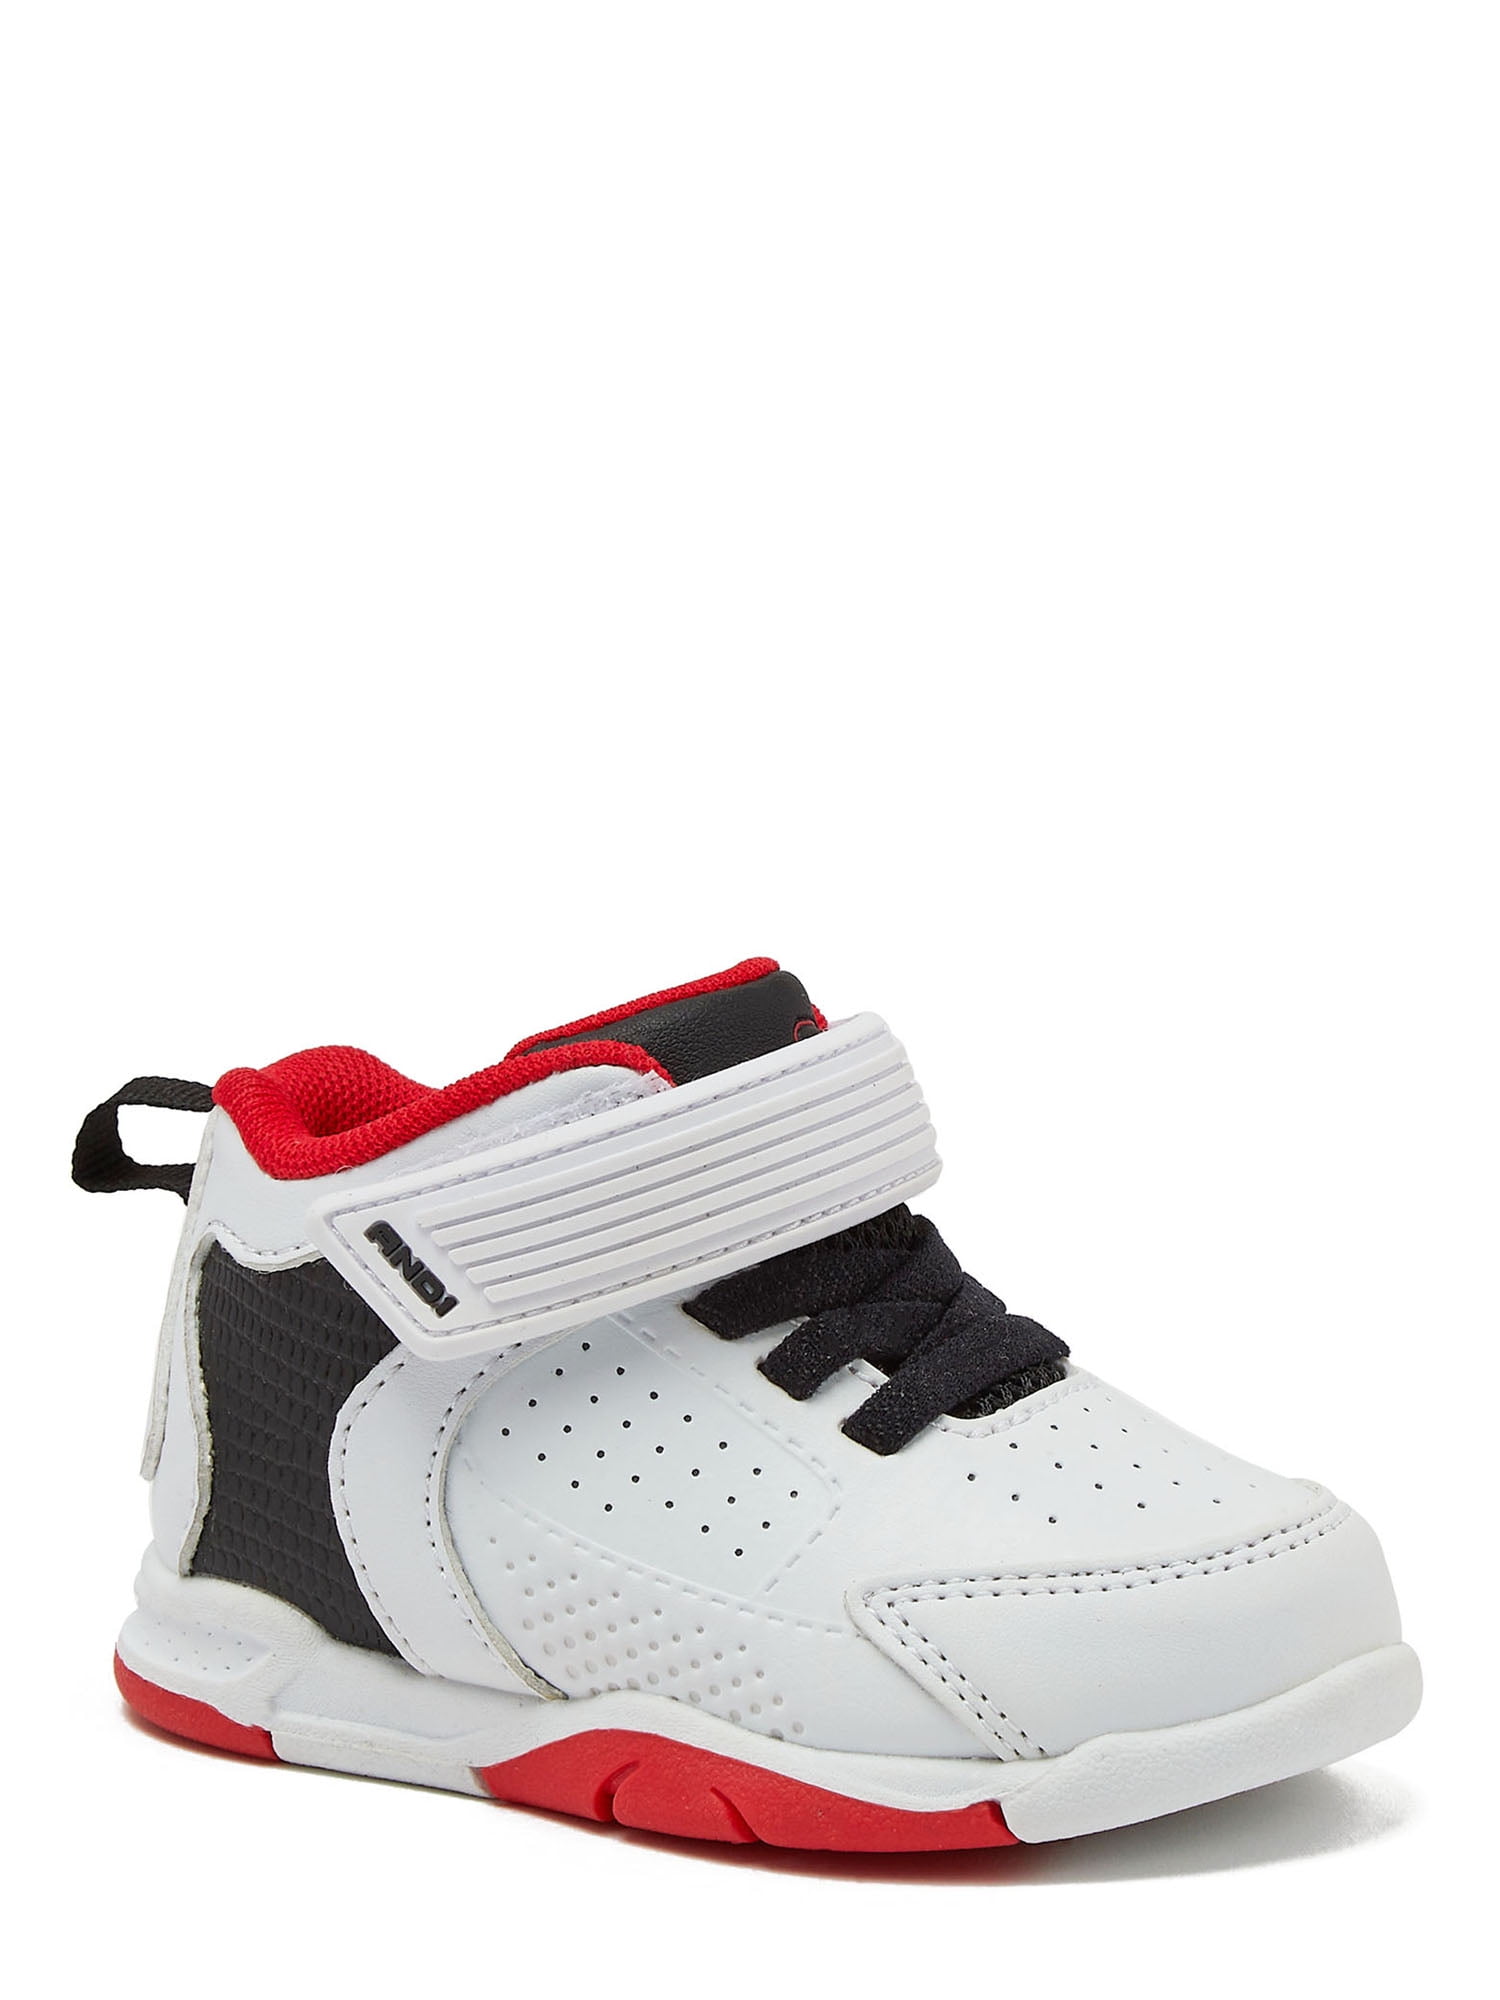 AND1 Baby Boys Basketball Sneakers, Sizes 2-6